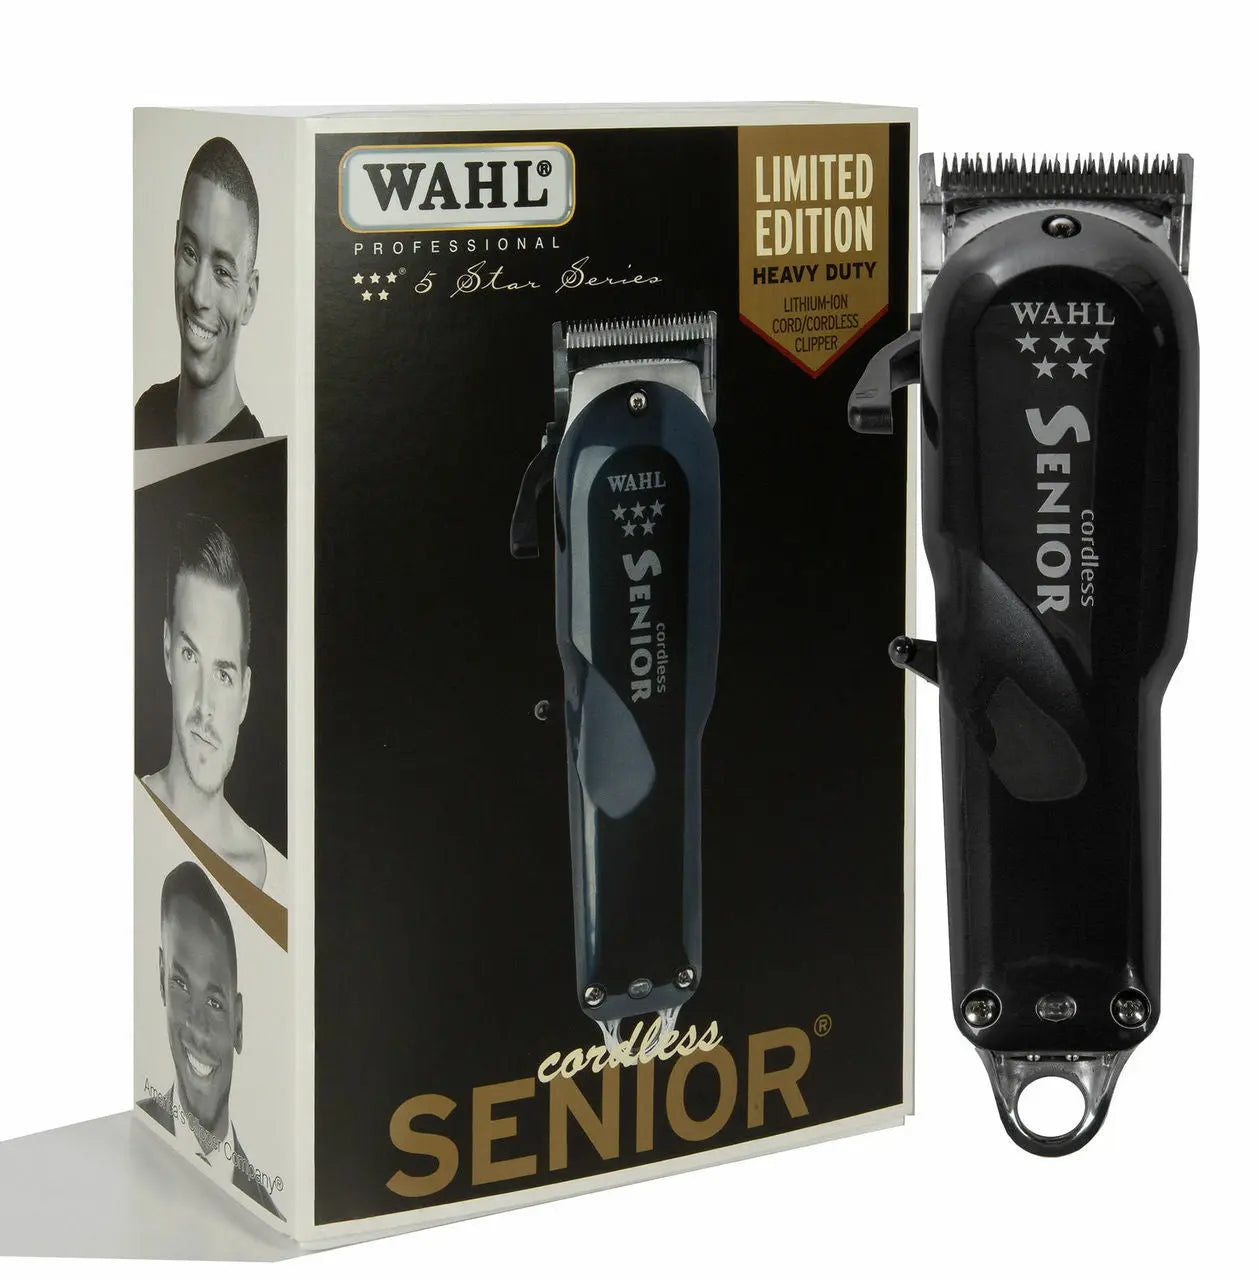 Wahl Professional Senior Metal Clipper Star Edition Charging Stand for Professional Barbers and Stylists - 5